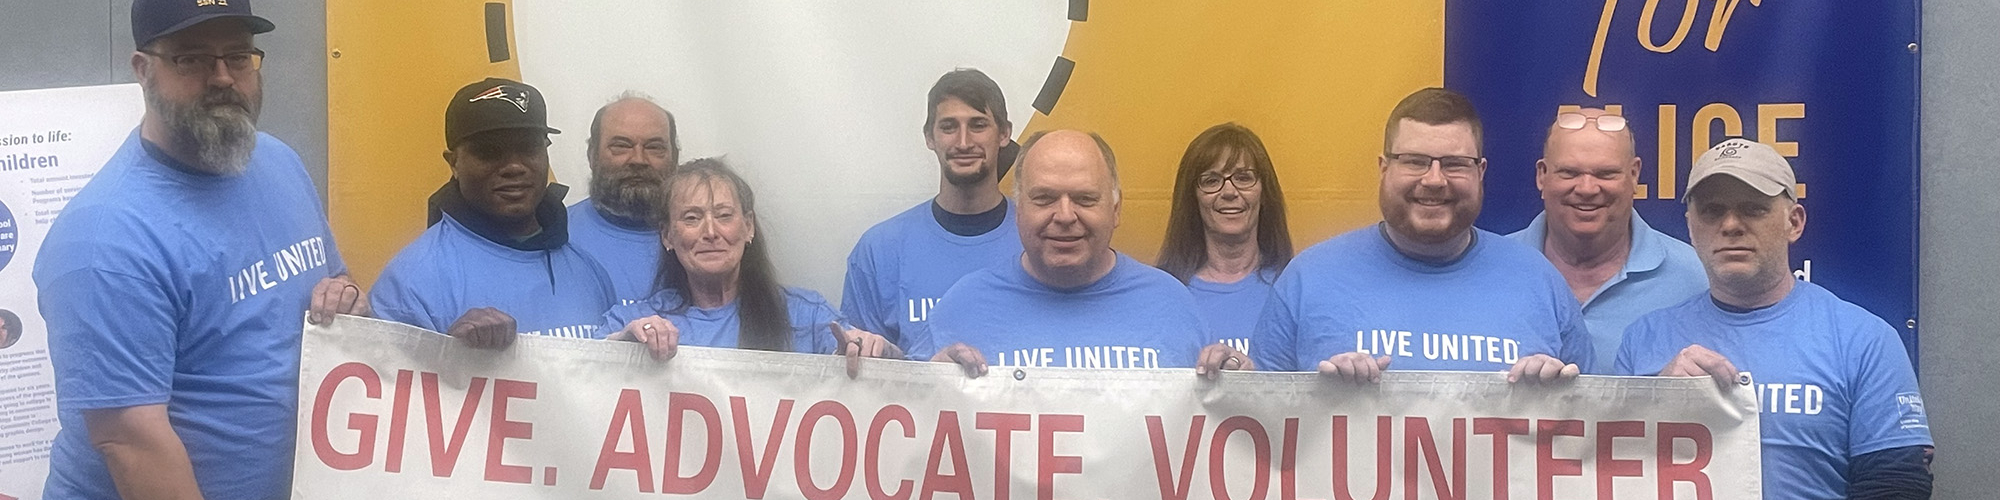 Members of the Union Counseling class holding the Labor banner